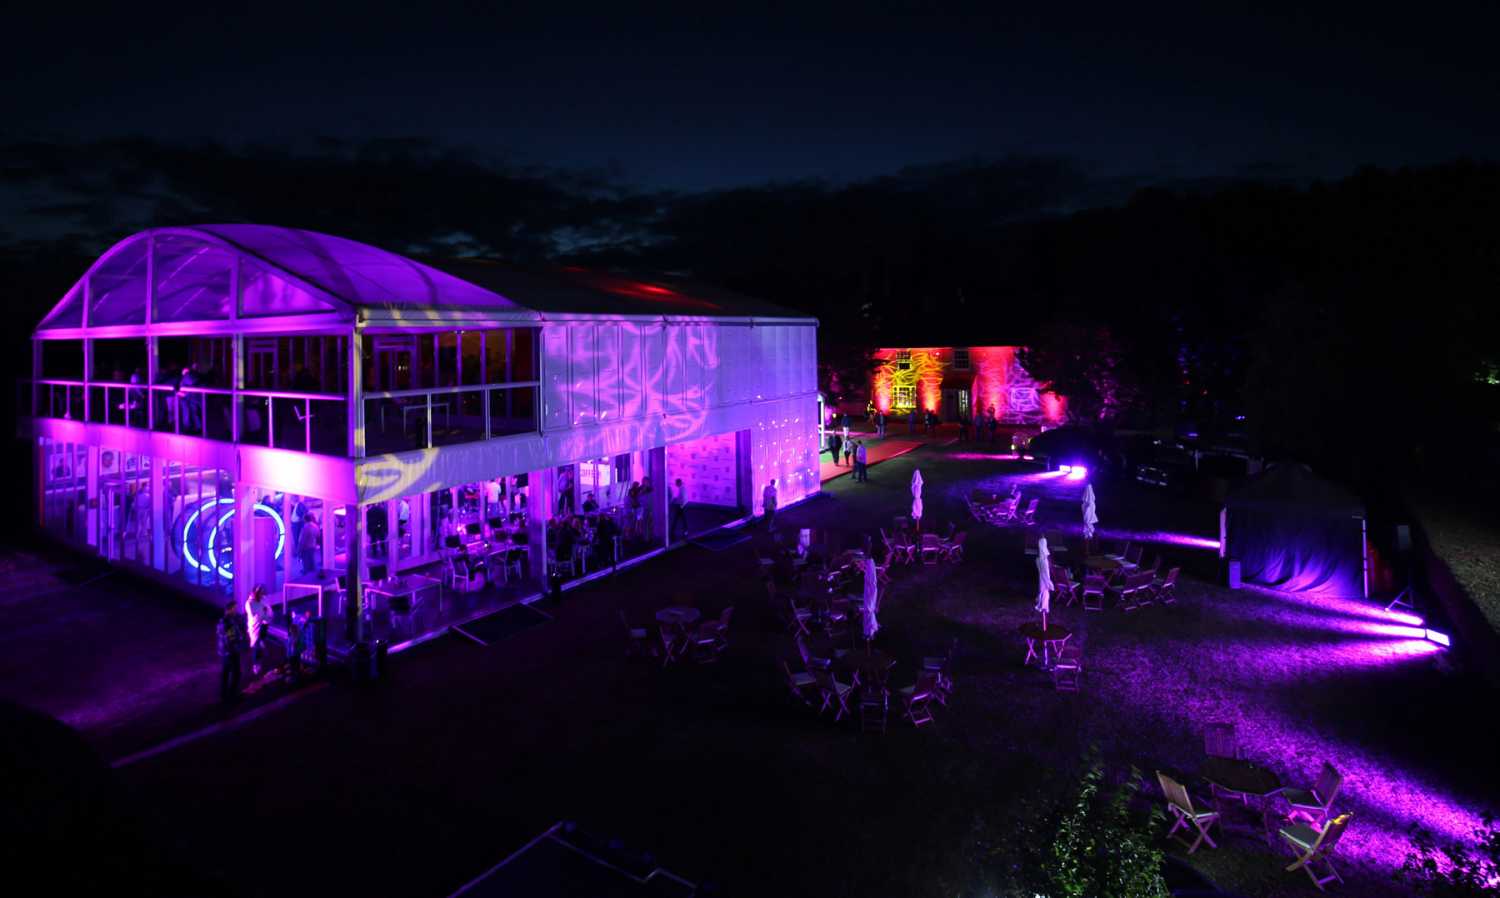 AC-ET supplied the complete indoor and outdoor effects lighting systems